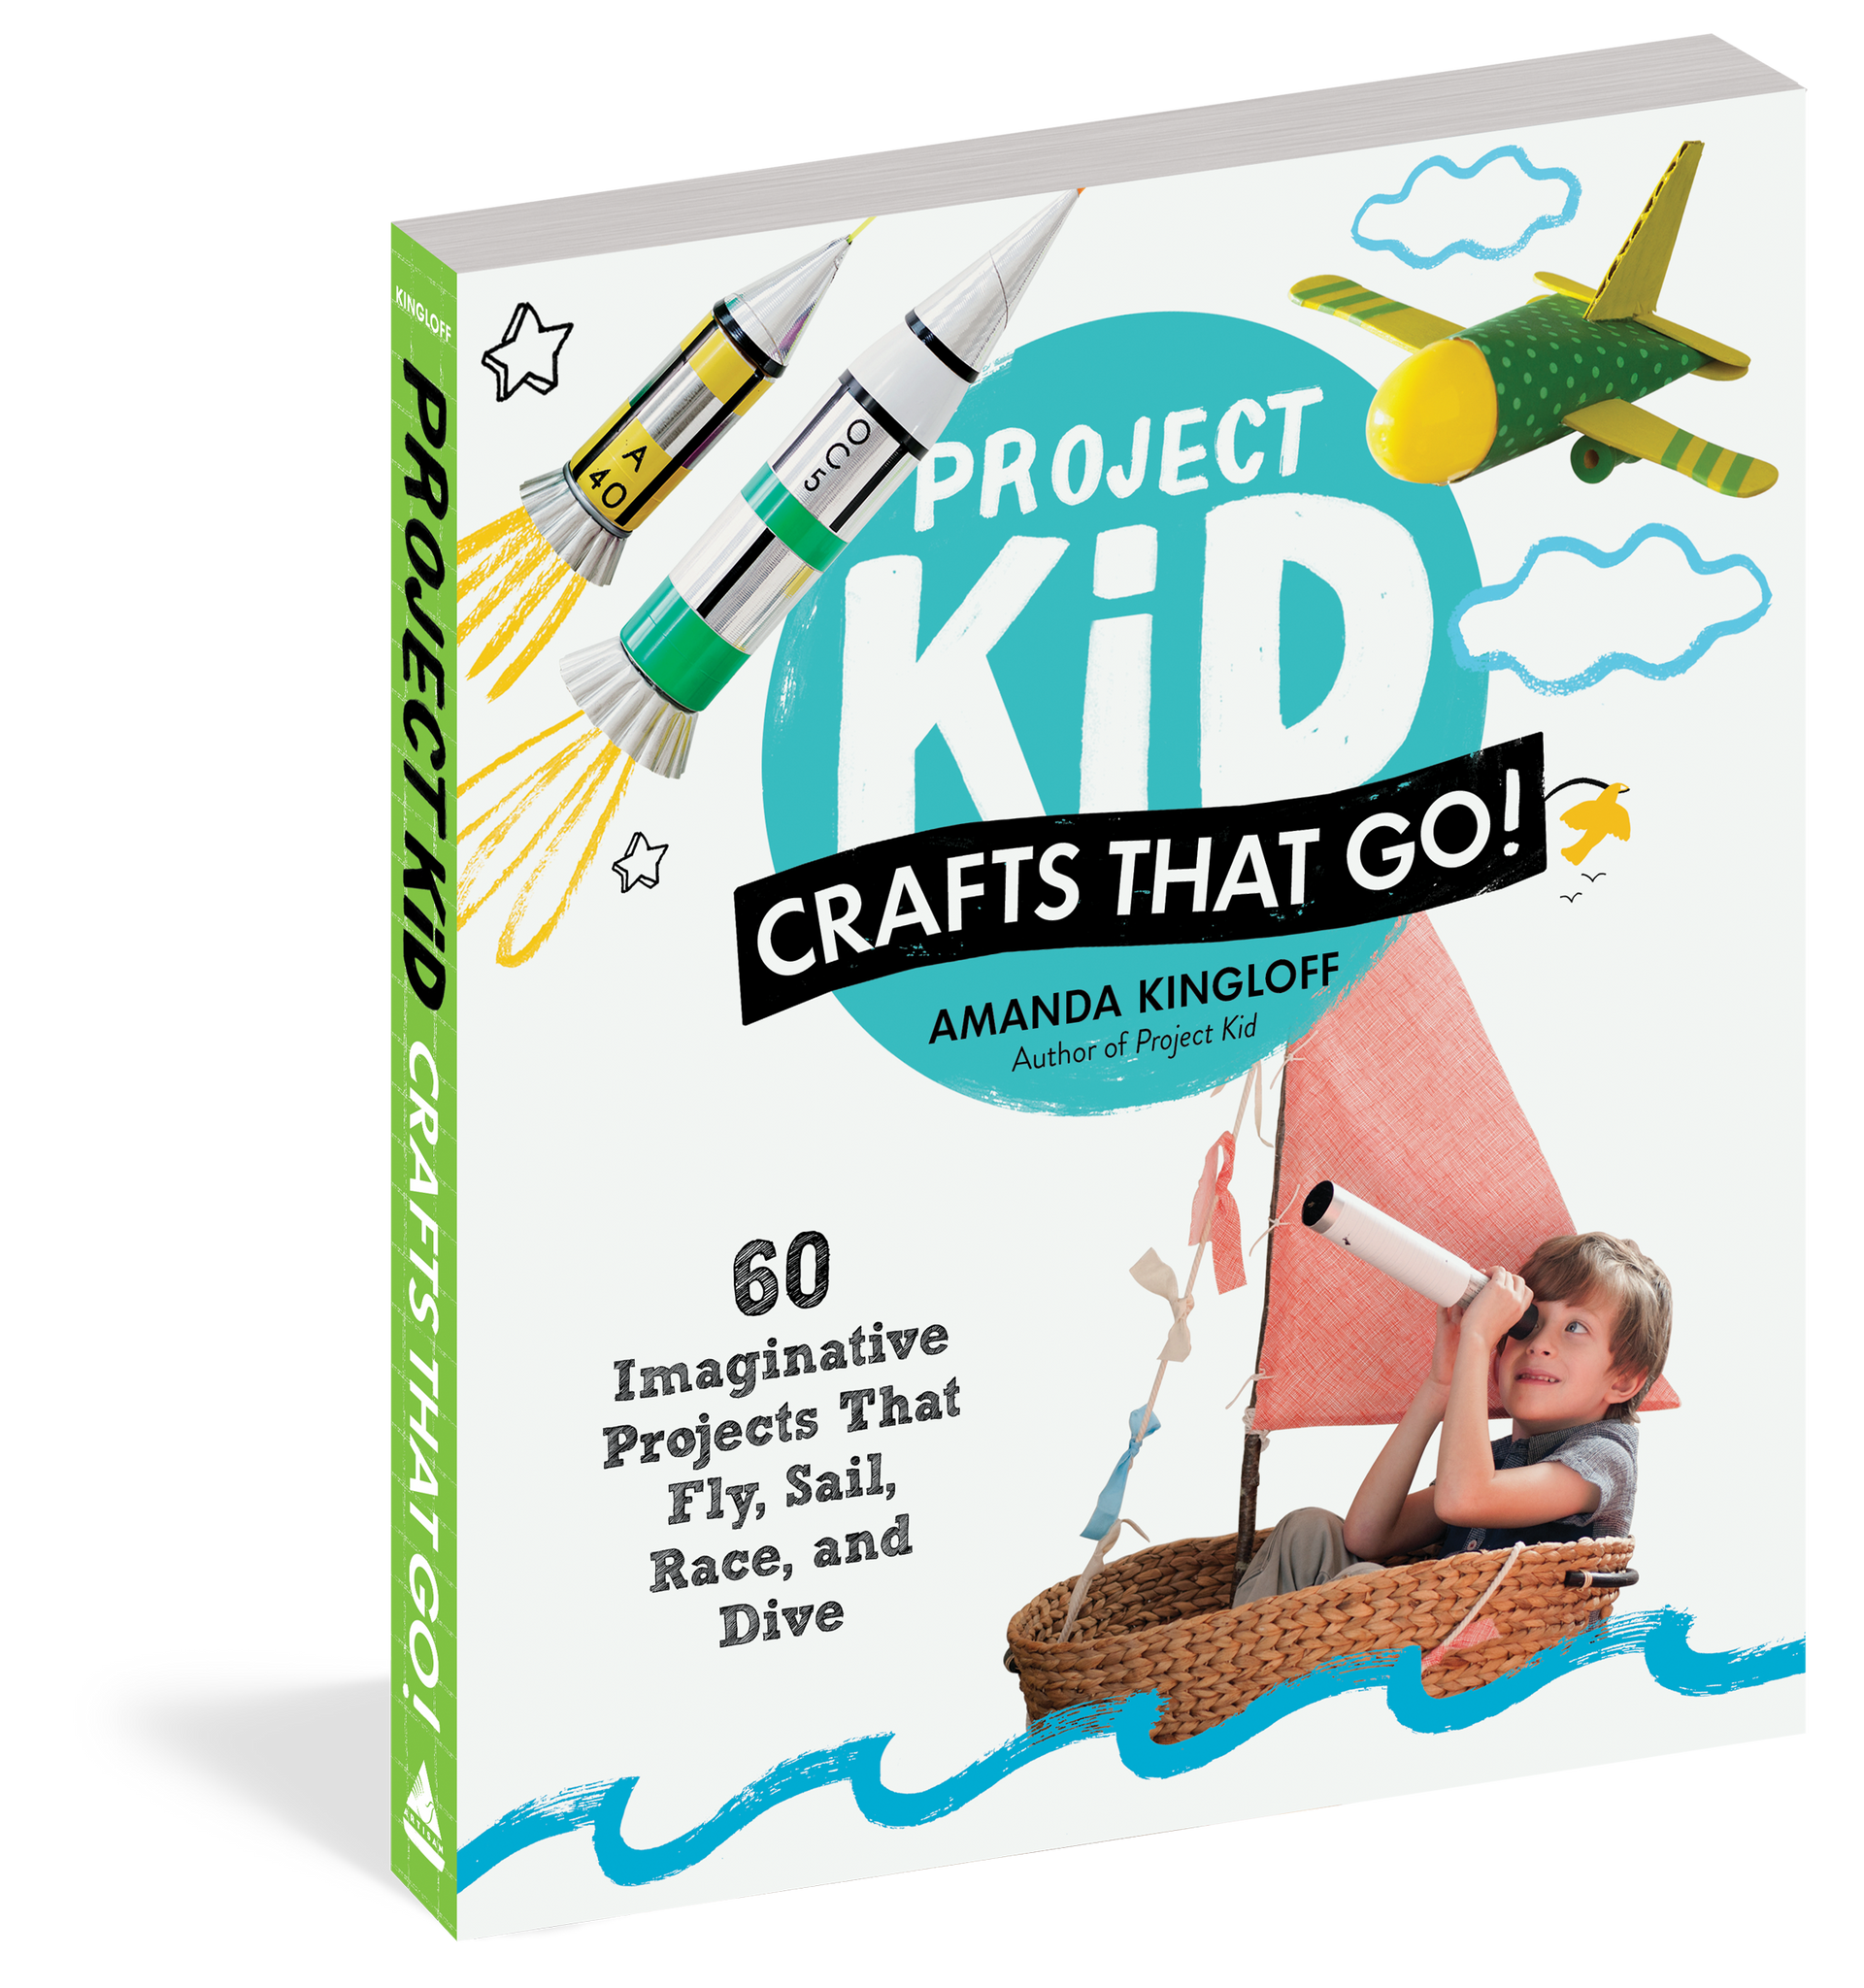 Project Kid: Crafts that Go!